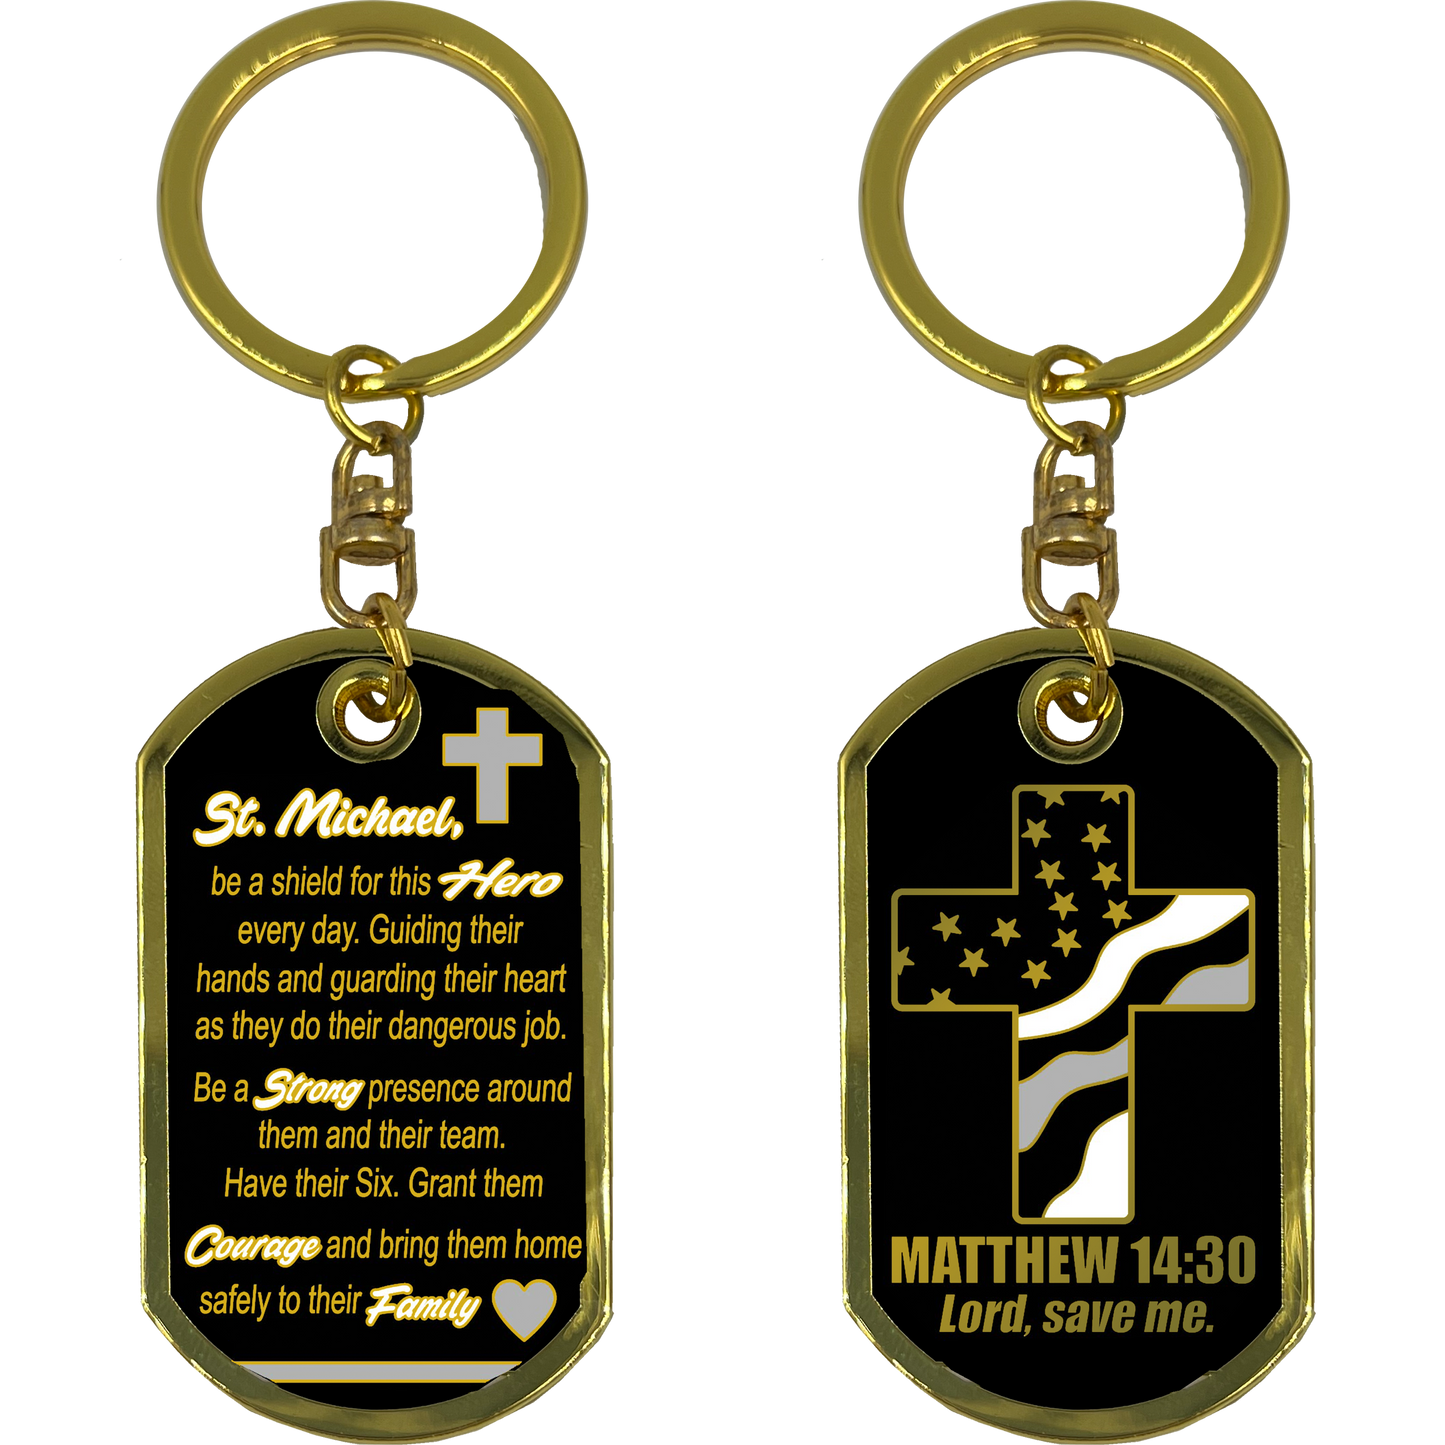 GL5-007 Correctional Officer CO Prayer Saint Michael Corrections Protect Us Matthew 14:30 Challenge Coin Dog Tag Keychain Thin Gray Line